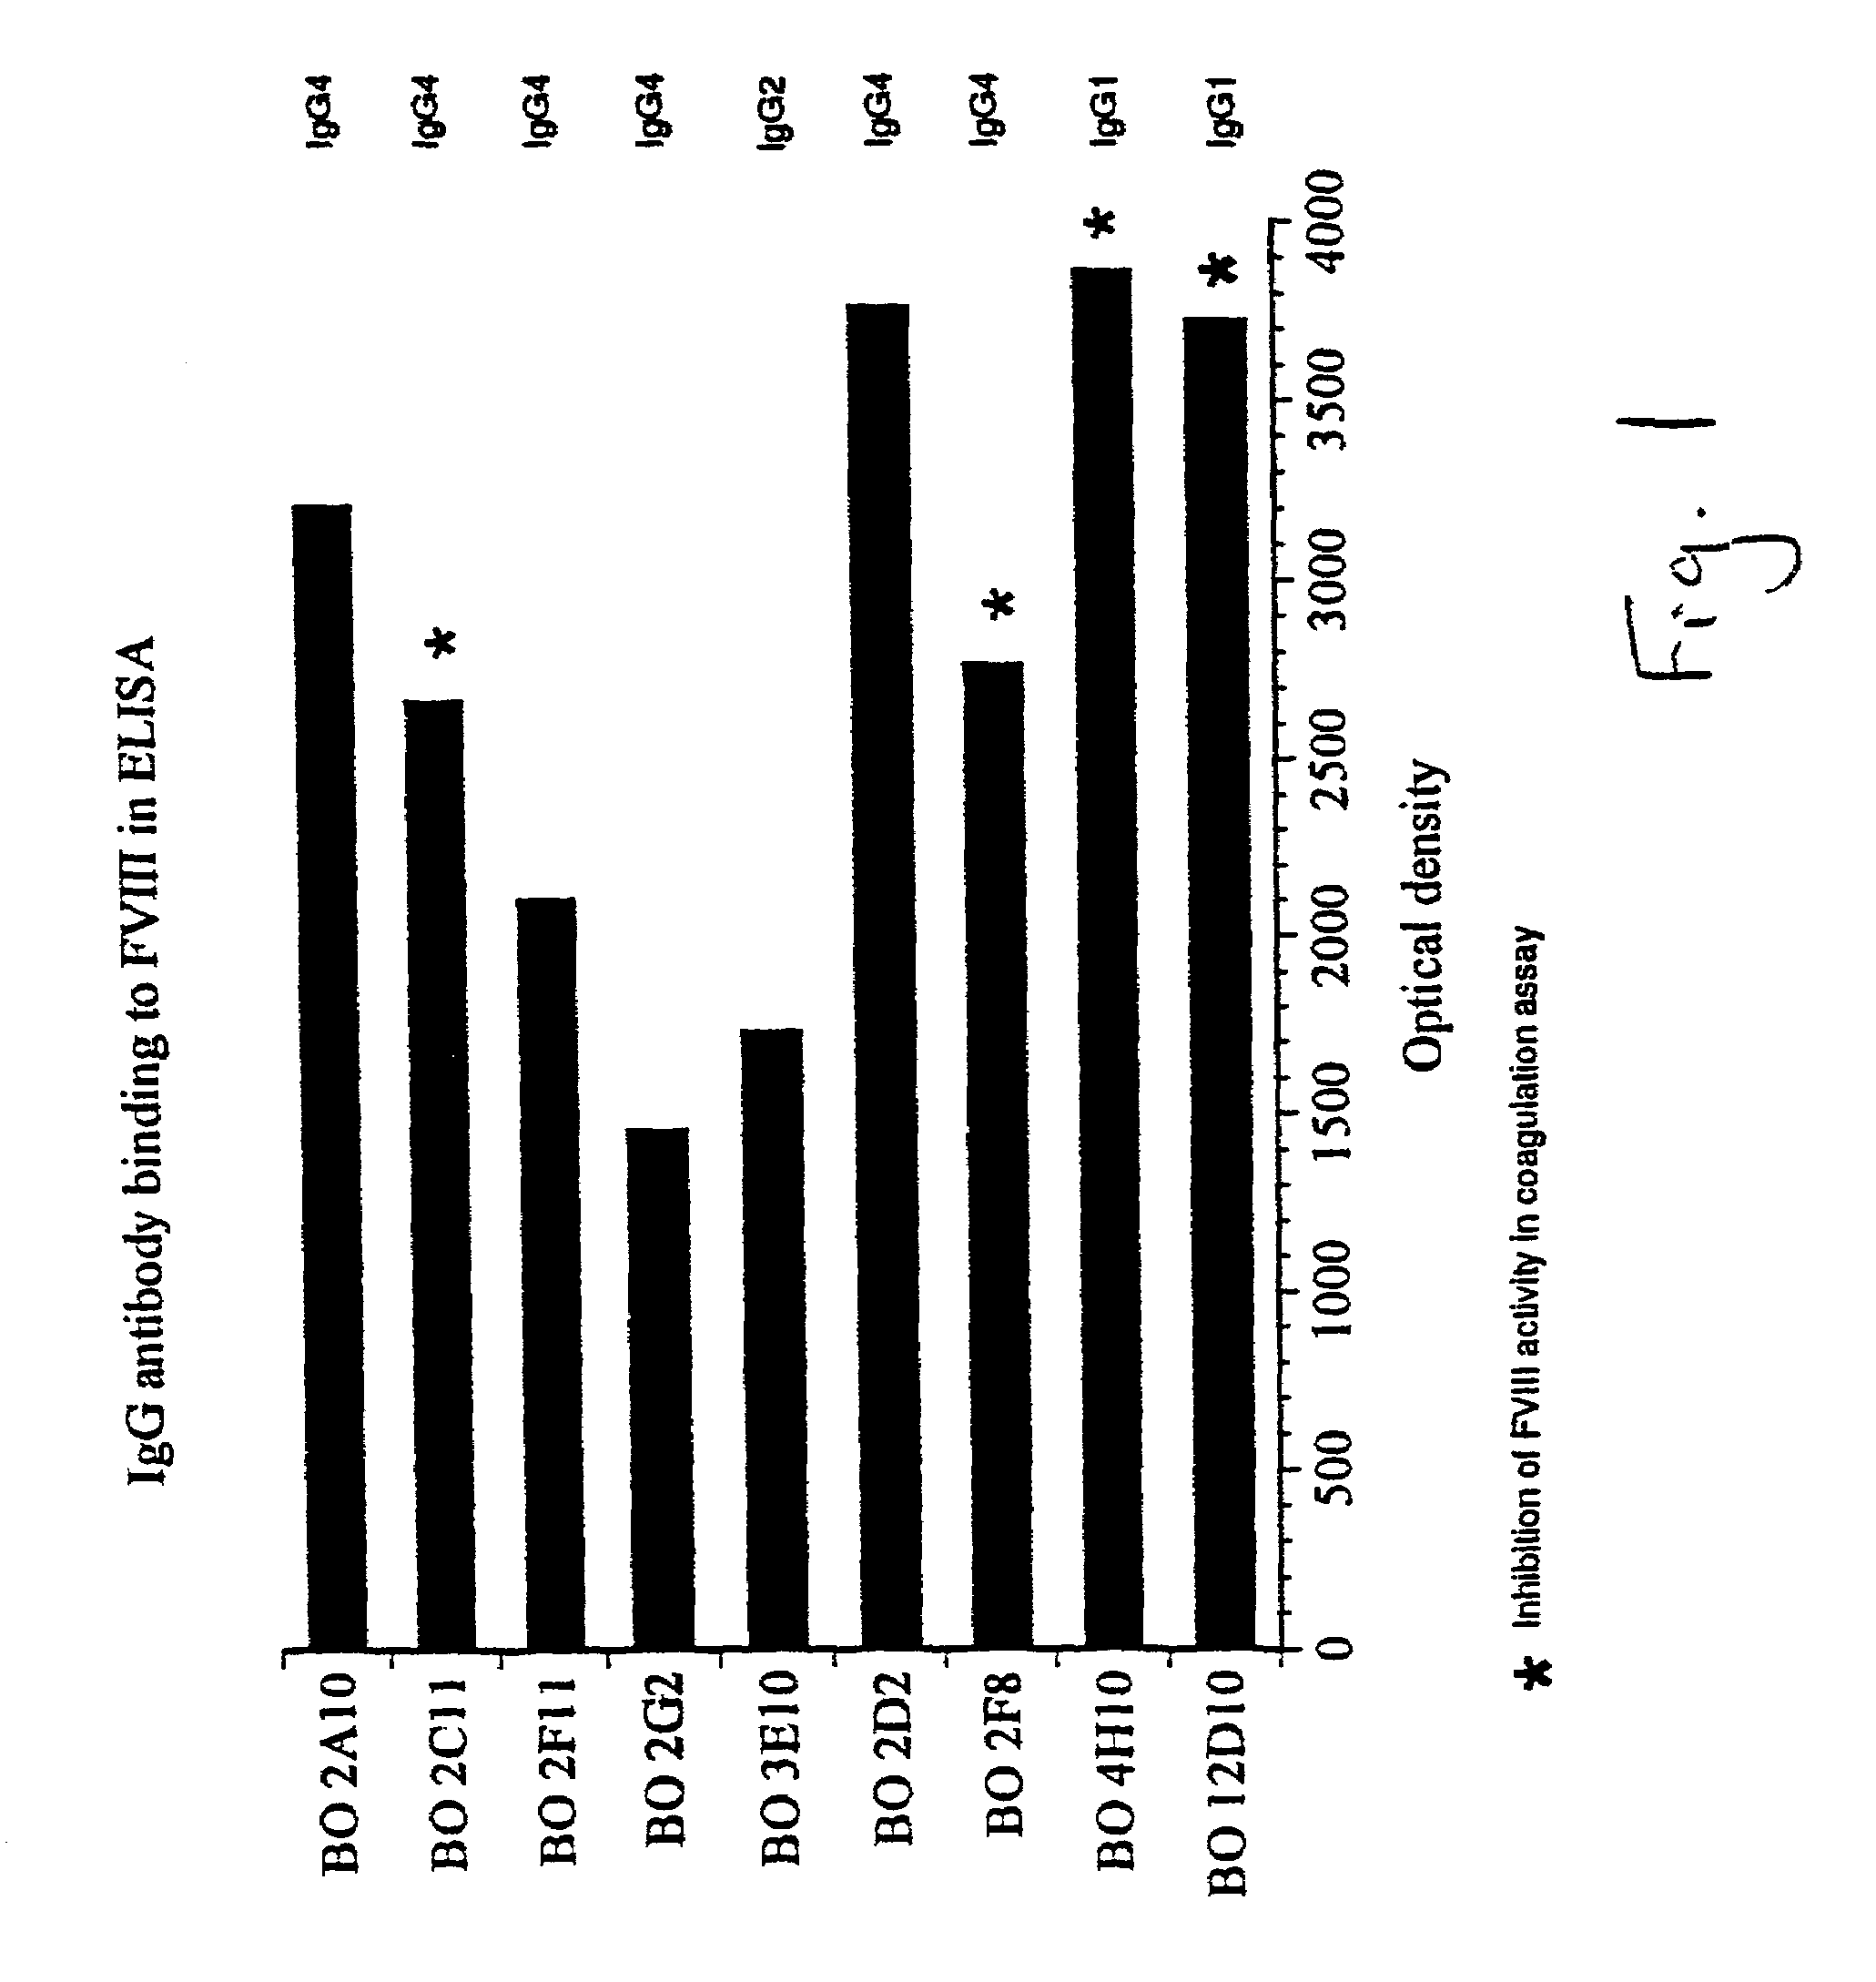 Ligands for use in therapeutic compositions for the treatment of hemostasis disorders